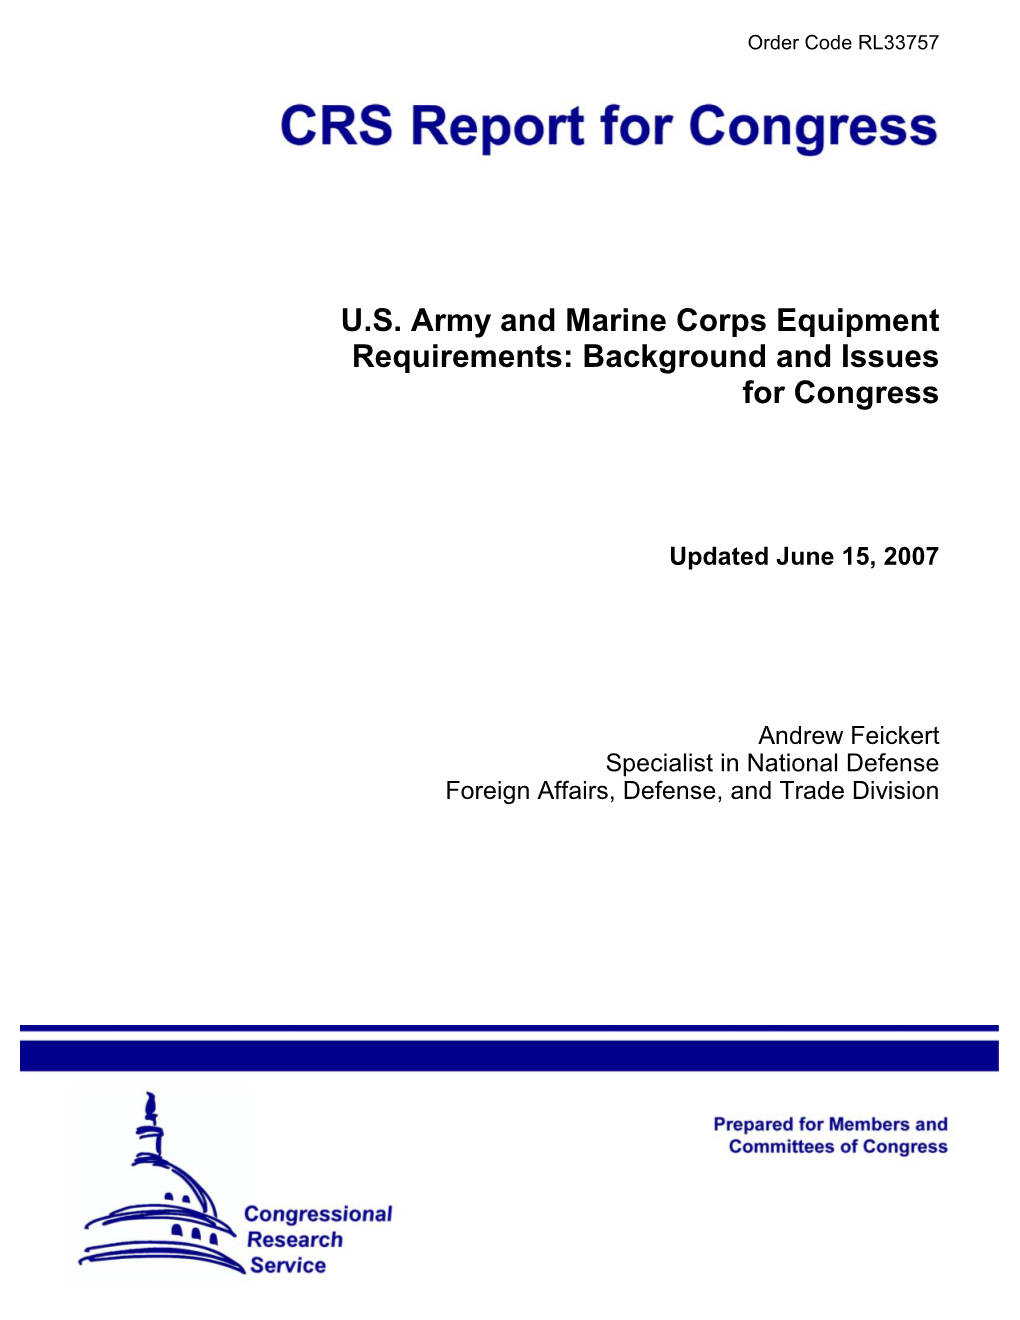 US Army and Marine Corps Equipment